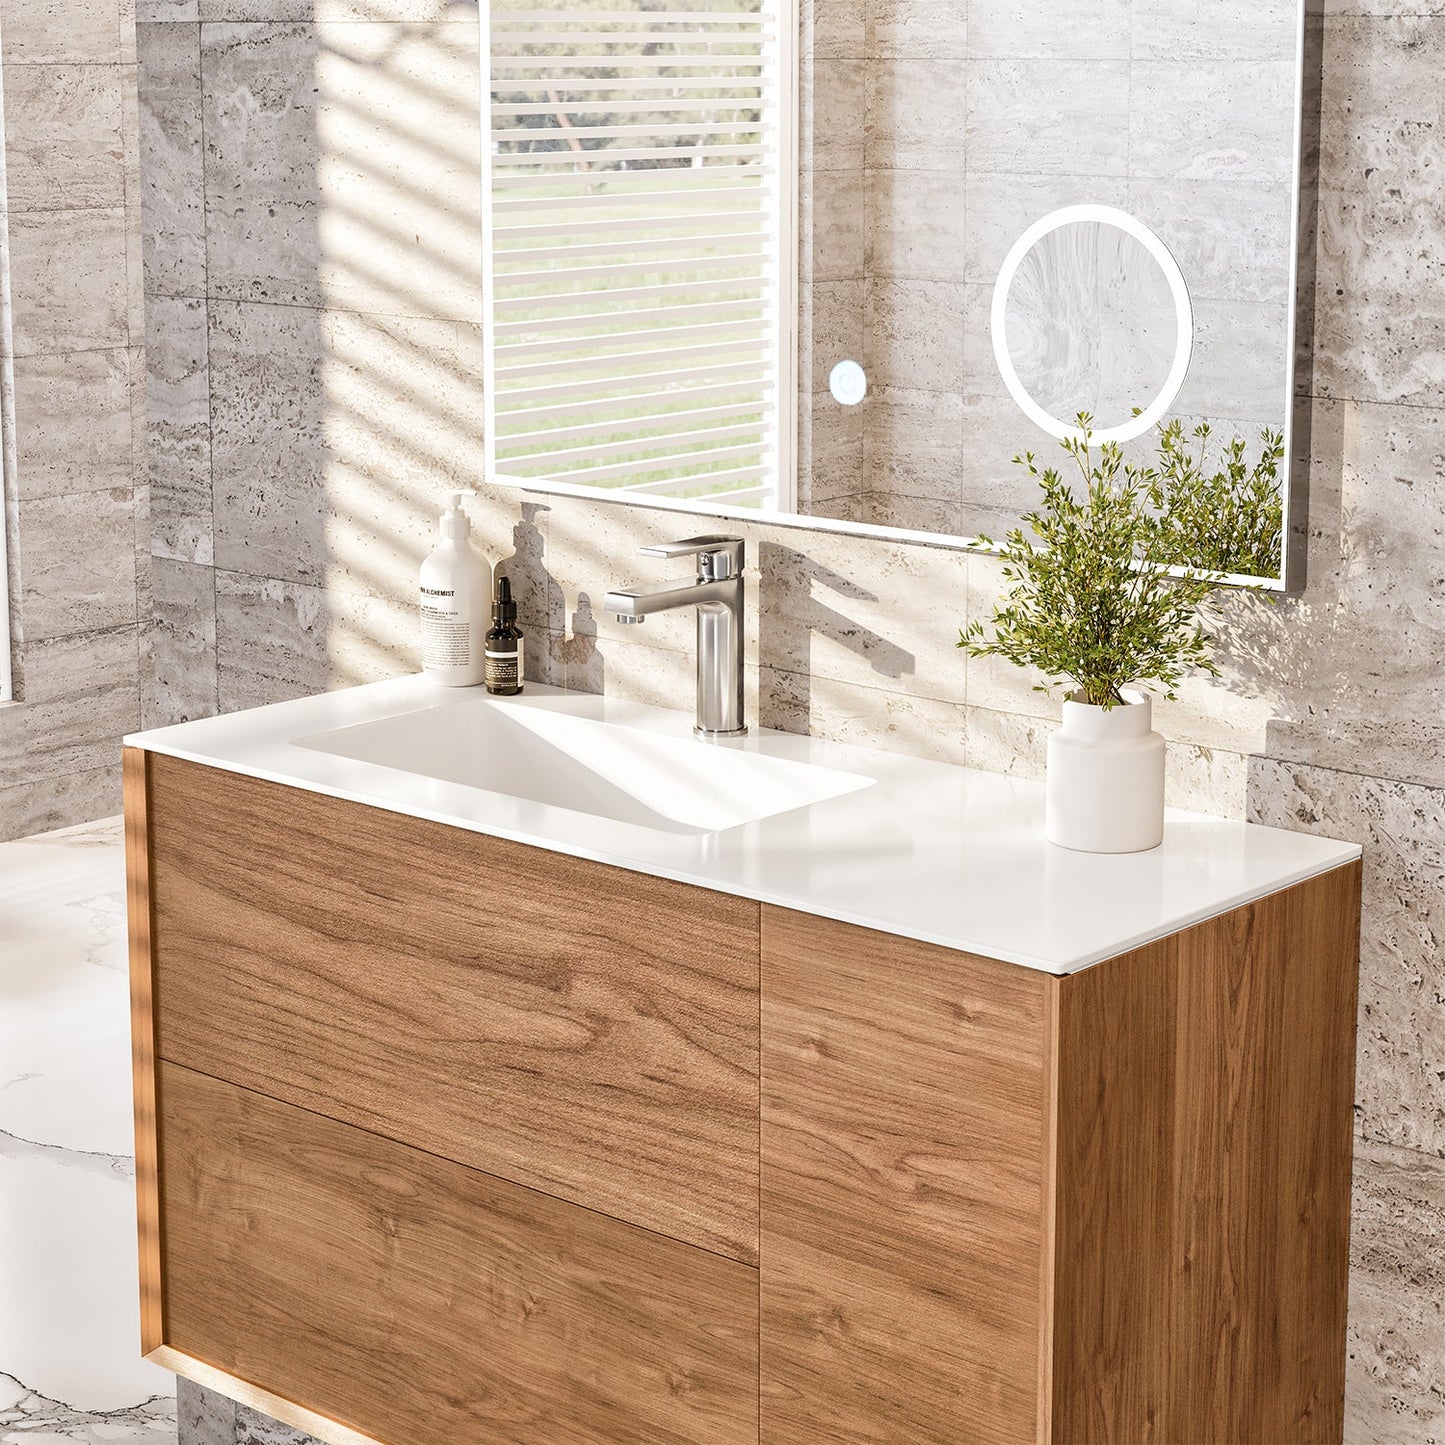 Prancer 36"W x 20"D Natural Oak Bathroom Vanity with Solid Surface Countertop and Integrated Sink